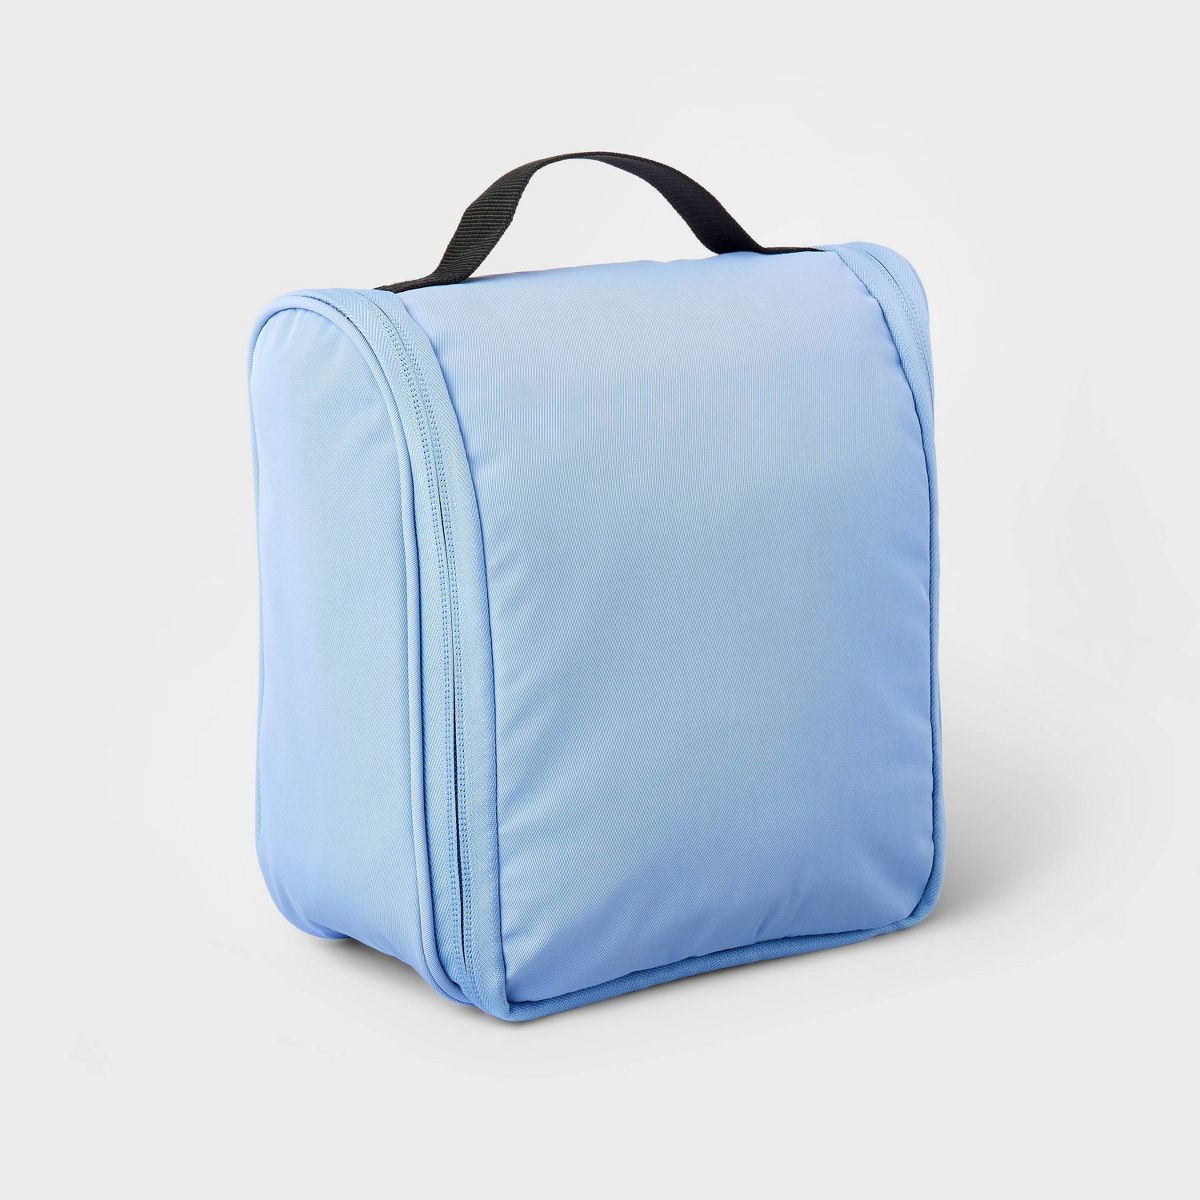 Small Hanging Toiletry Bag Blue - Open Story™ | Target